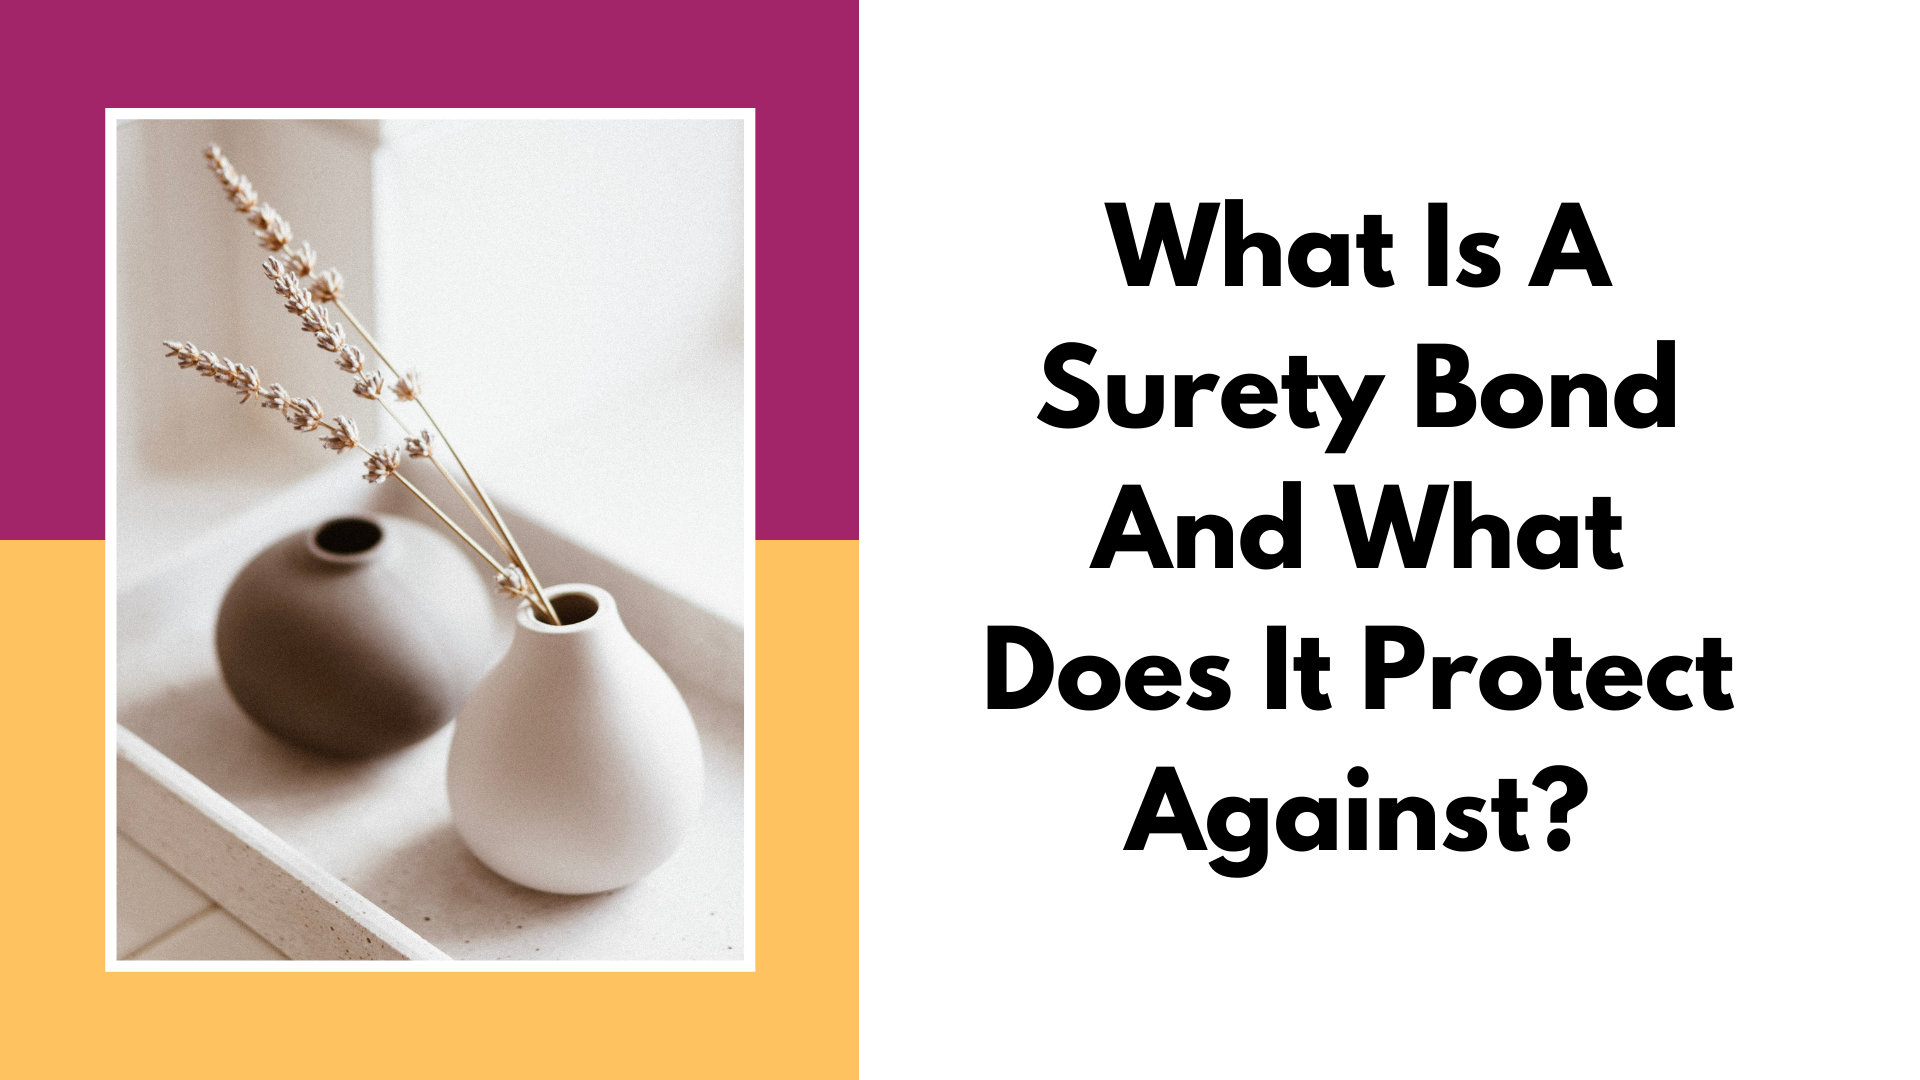 surety bond - What is a surety bond and what does it protect against - minimalist